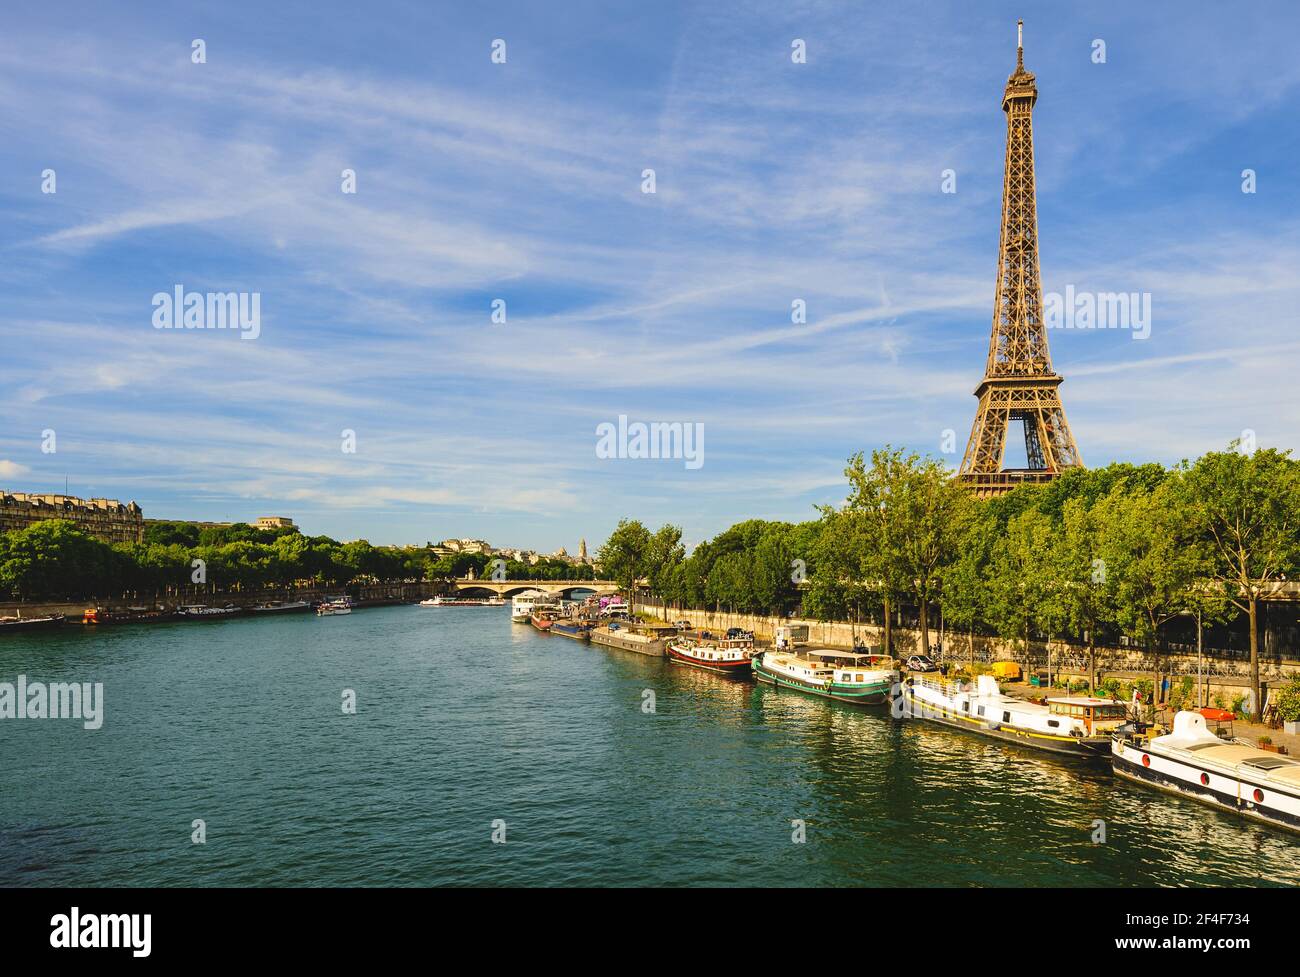 Eiffel Tower at left bank of seine river in paris, france Stock Photo